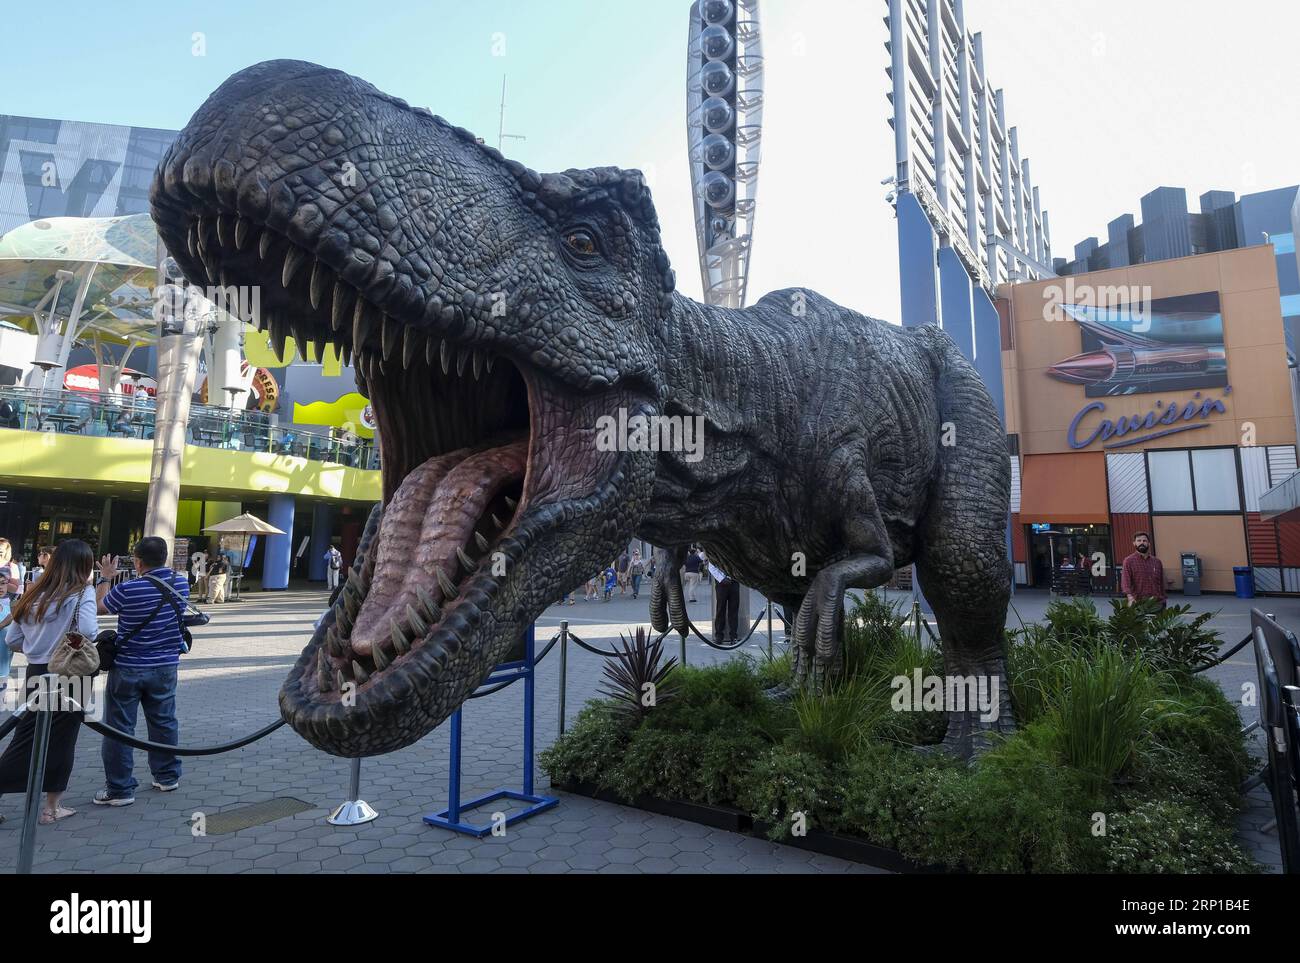 (180622) -- LOS ANGELES, June 22, 2018 -- A giant Tyrannosaurus rex statue is seen at Universal CityWalk in Los Angeles, the United States, on June 21, 2018. For the promotion of the screening of the new film Jurassic World: Fallen Kingdom on Universal Cinema Theatres, a colossal 3-ton Tyrannosaurus rex, a life-sized Gyrosphere original movie prop, as well as original costume, are displayed for public at Universal CityWalk. ) (zxj) U.S.-LOS ANGELES-DINOSAUR-STATUE ZhaoxHanrong PUBLICATIONxNOTxINxCHN Stock Photo